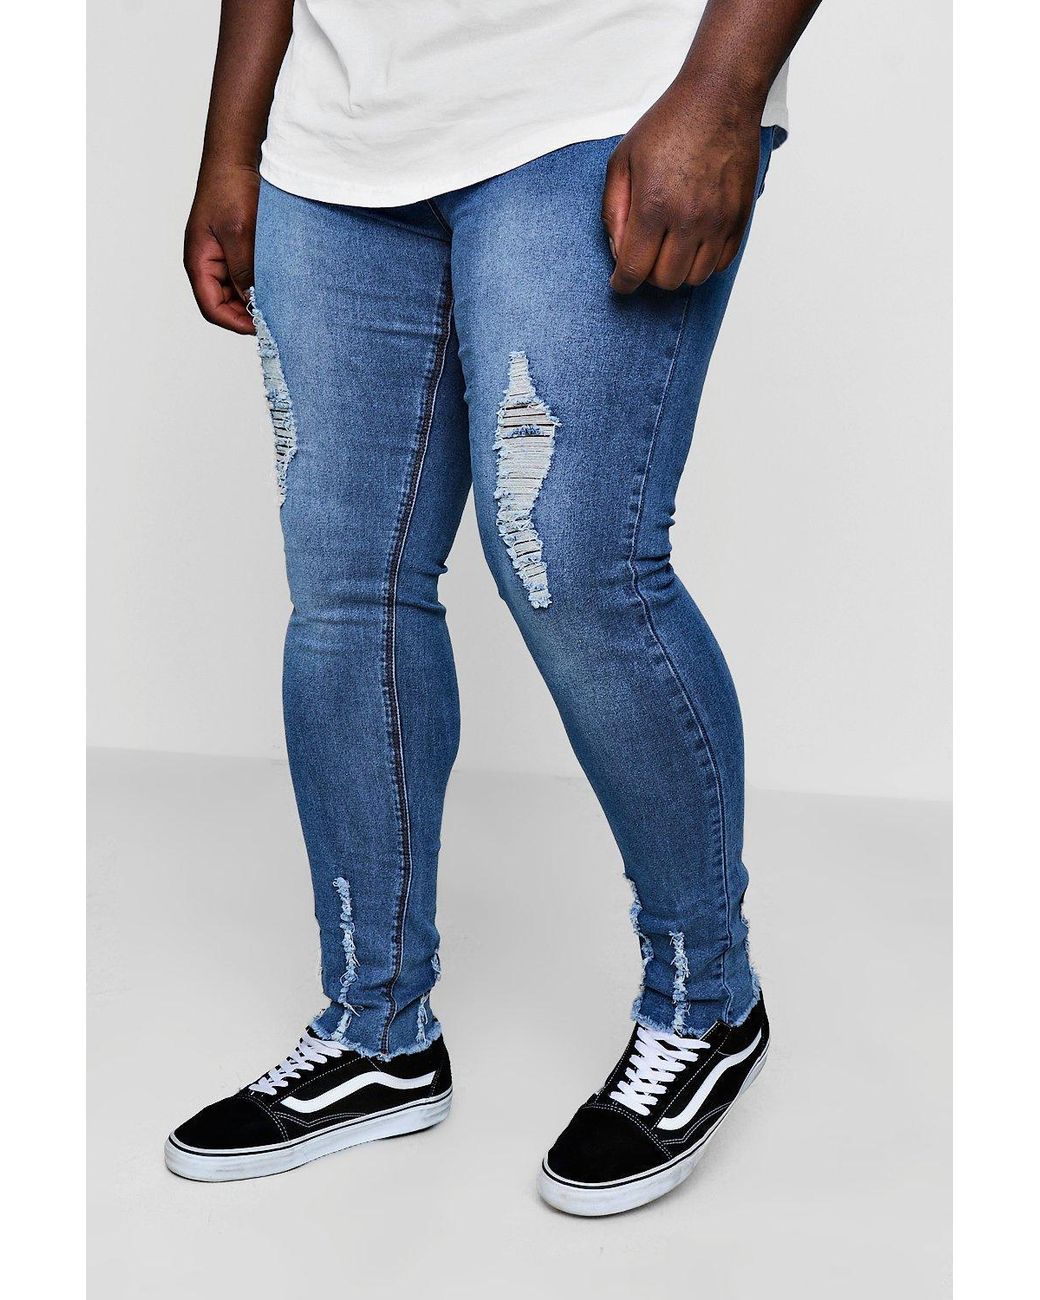 Boohooman Big And Tall Skinny Jeans With Raw Hem In Blue For Men Lyst